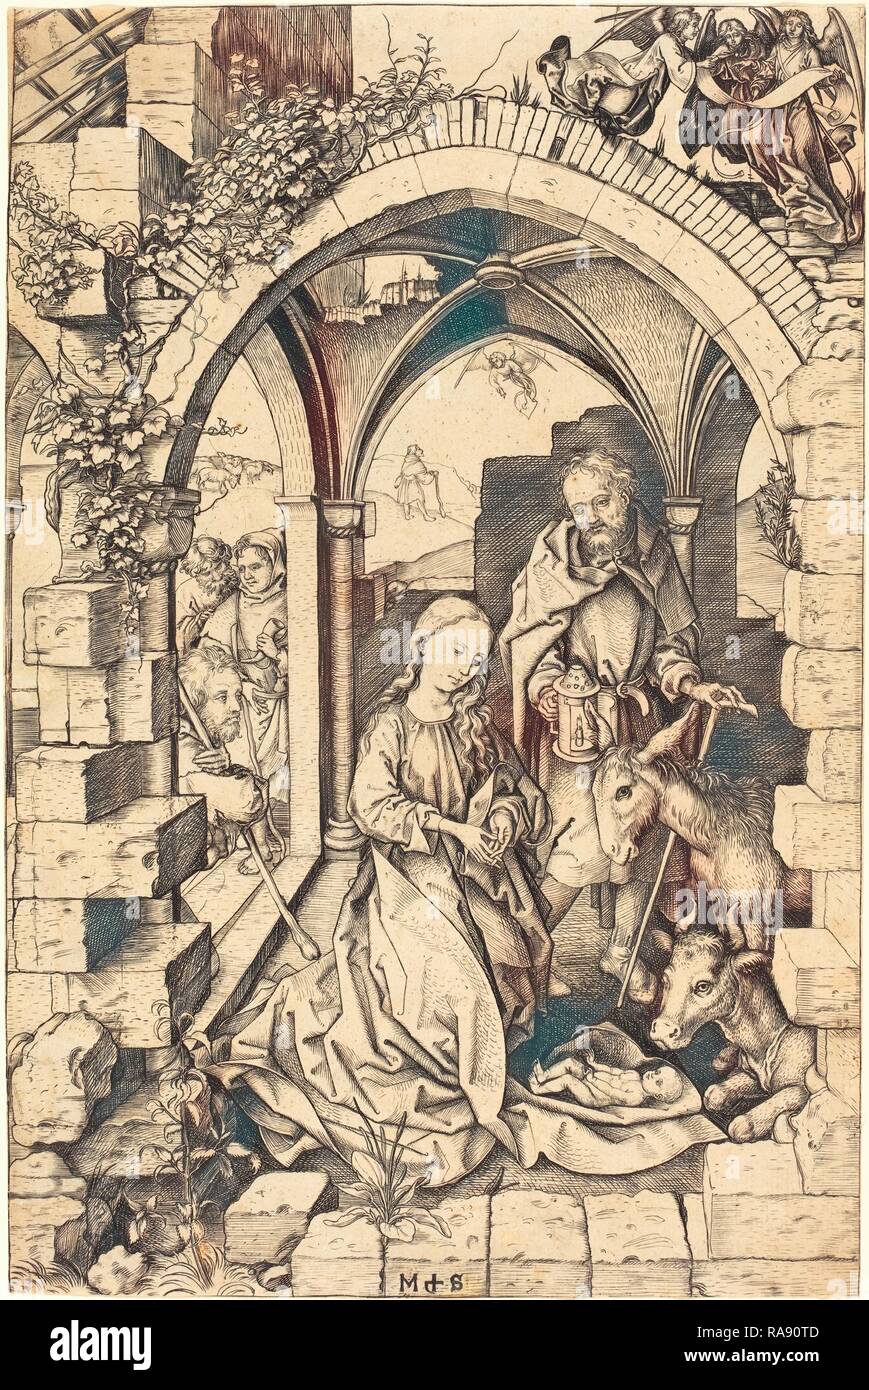 Martin Schongauer (German, c. 1450 - 1491), The Nativity, c. 1470-1475, engraving on laid paper. Reimagined Stock Photo